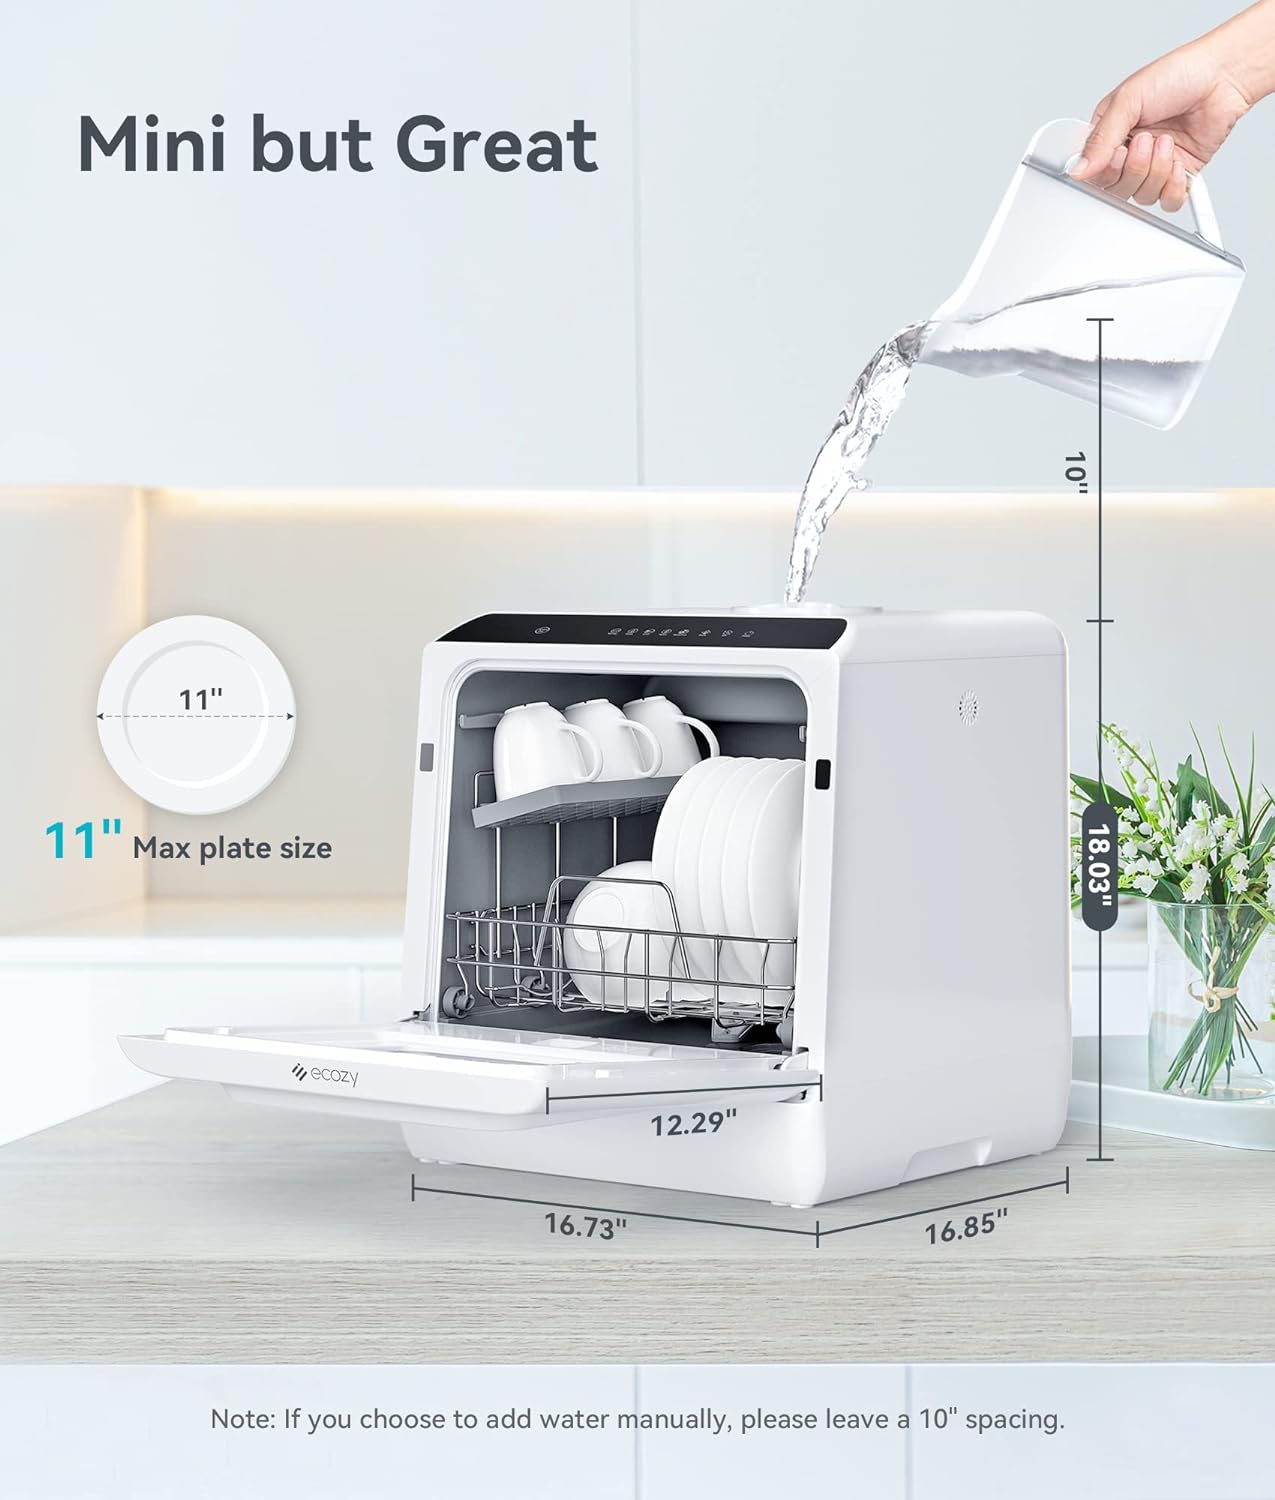 ecozy Portable Dishwasher Countertop Mini Dishwasher with a Built-in 5L Water Tank